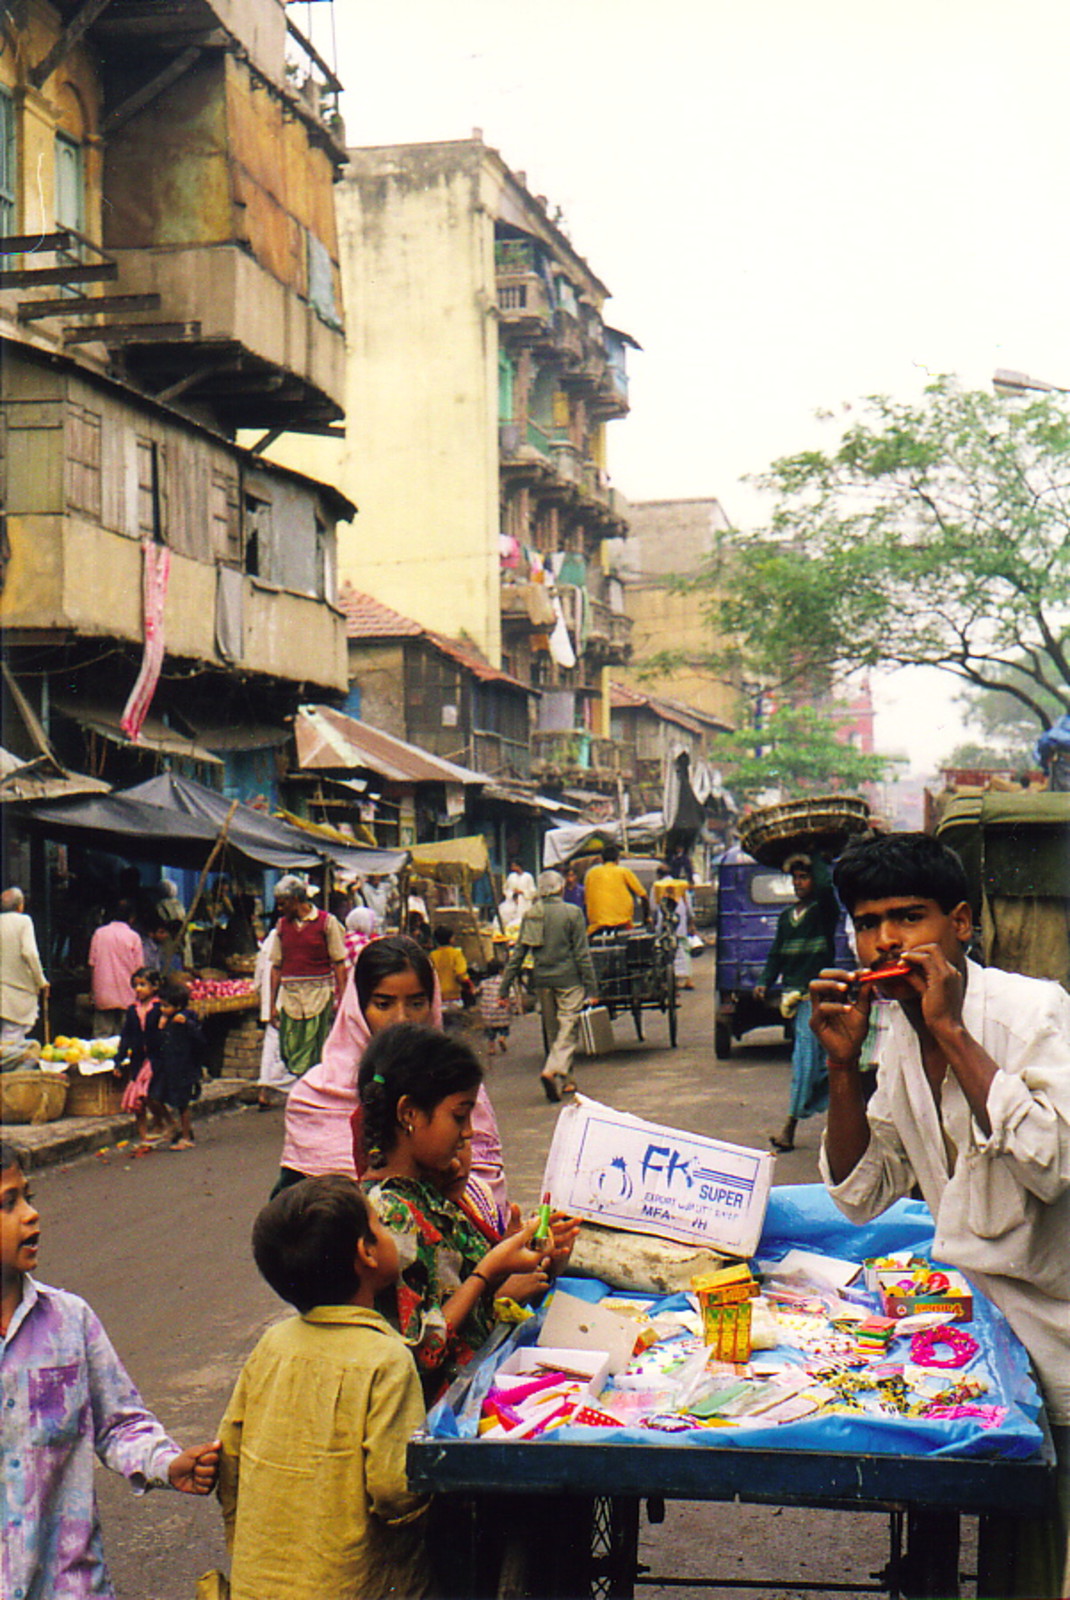 A man selling wares in Calcutta